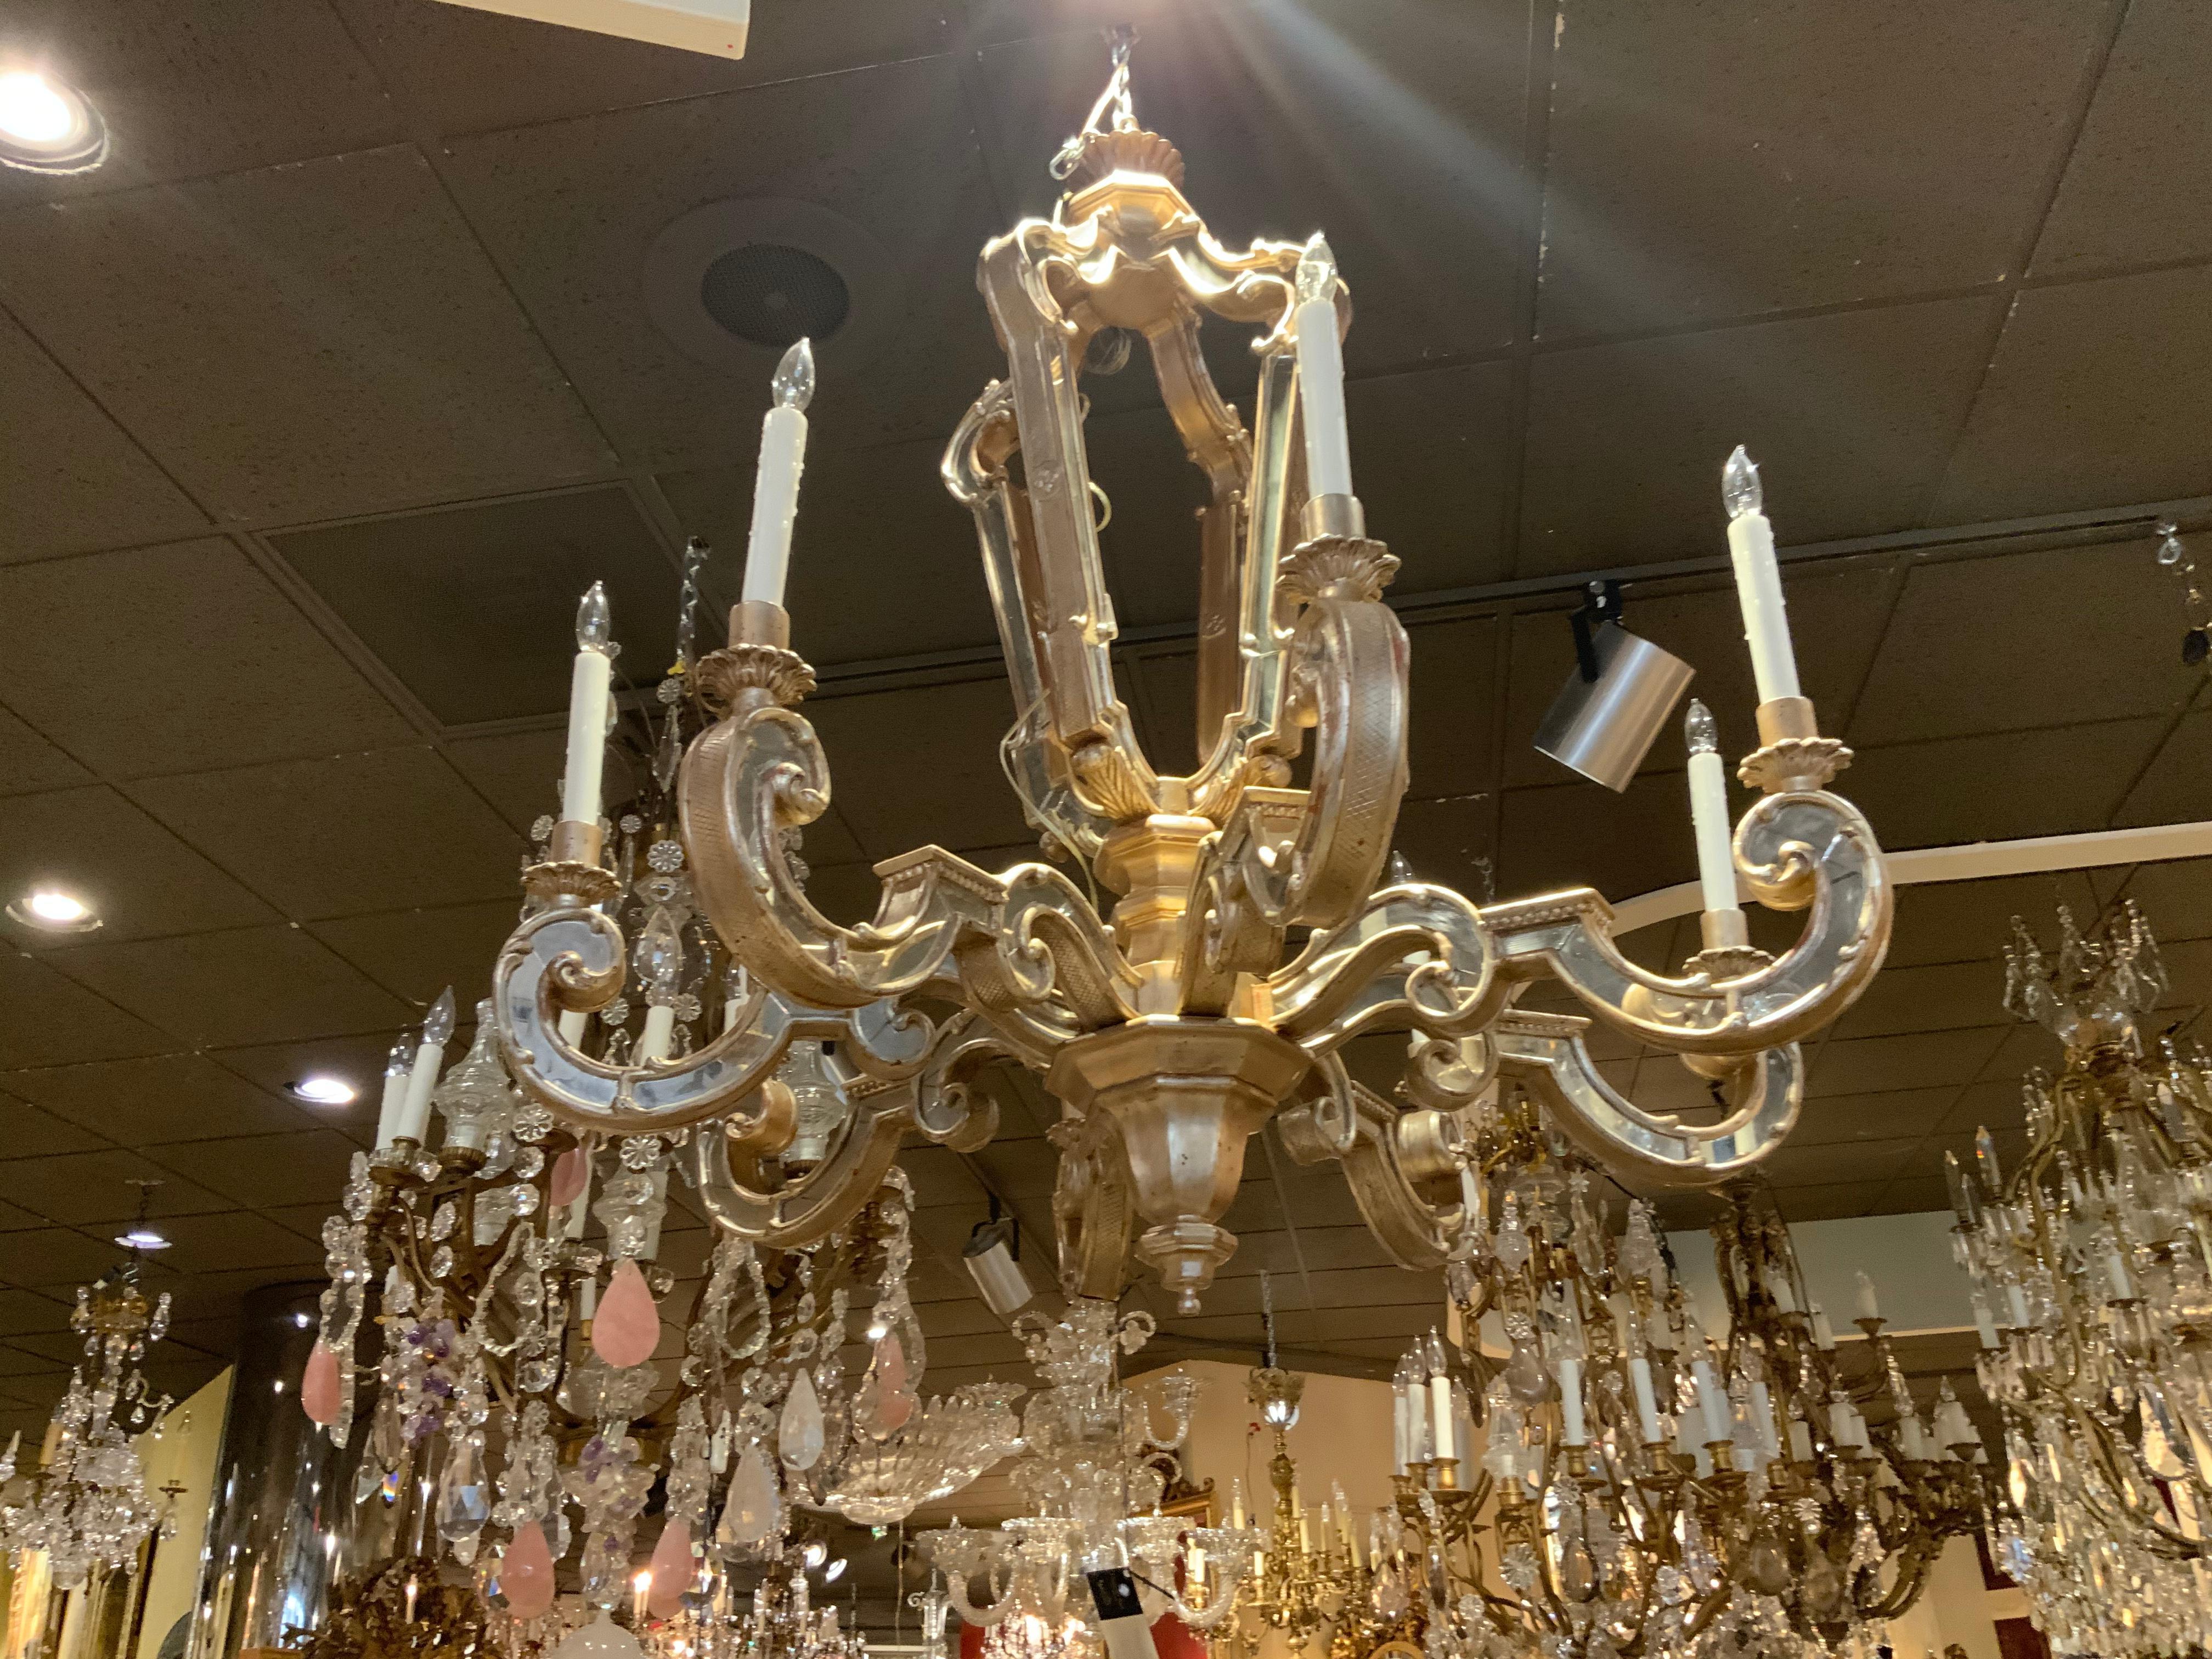 Gilt Silver Leaf Wood Carved Chandelier with Mirrors Inlaid and Scrolling Arms